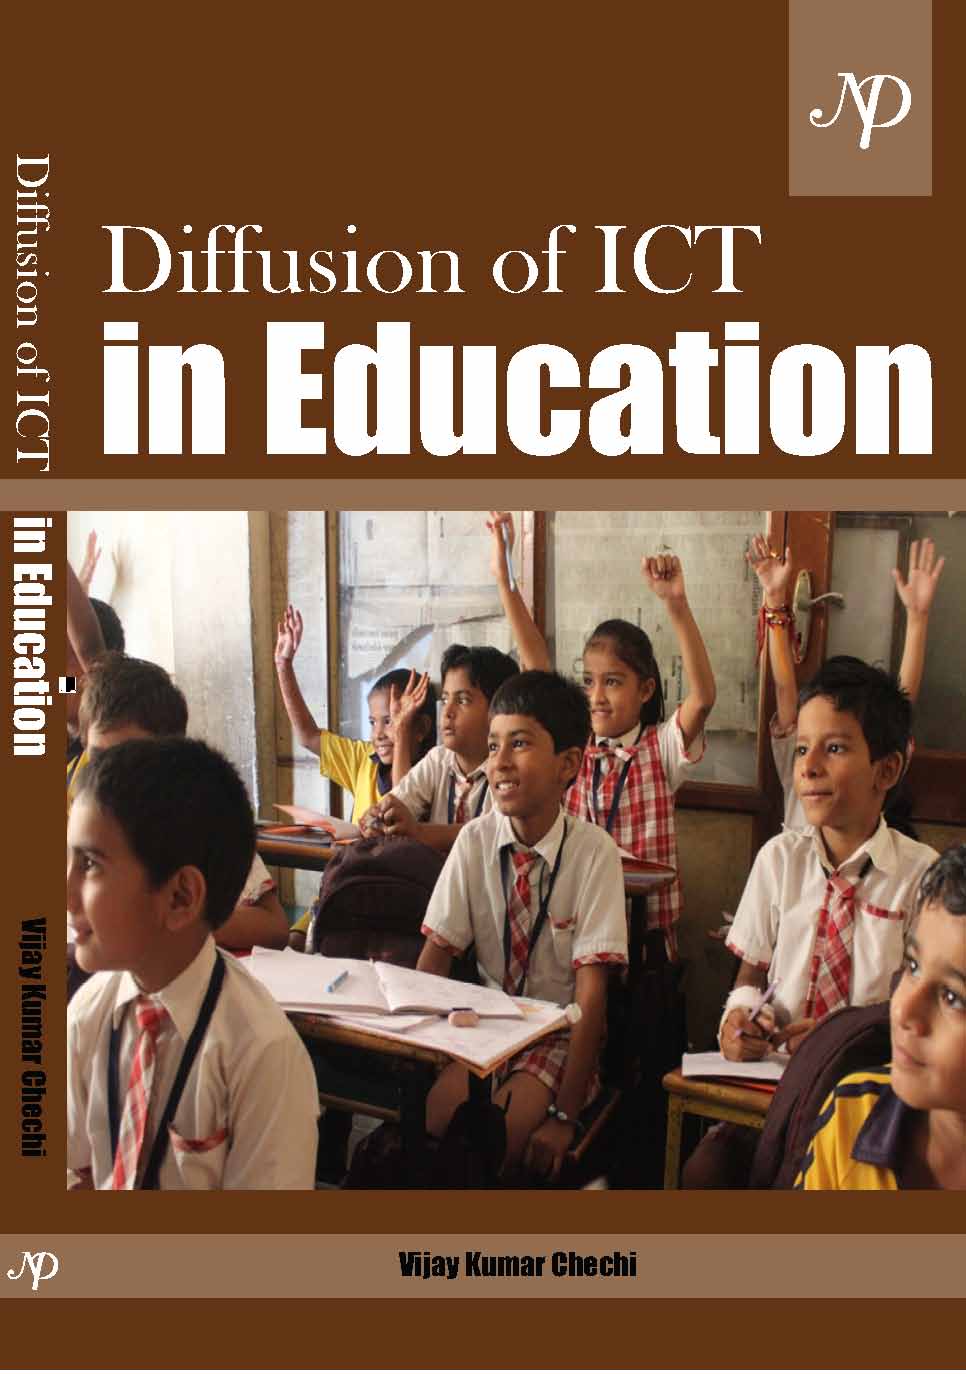 Diffusion of ICT in Education.jpg